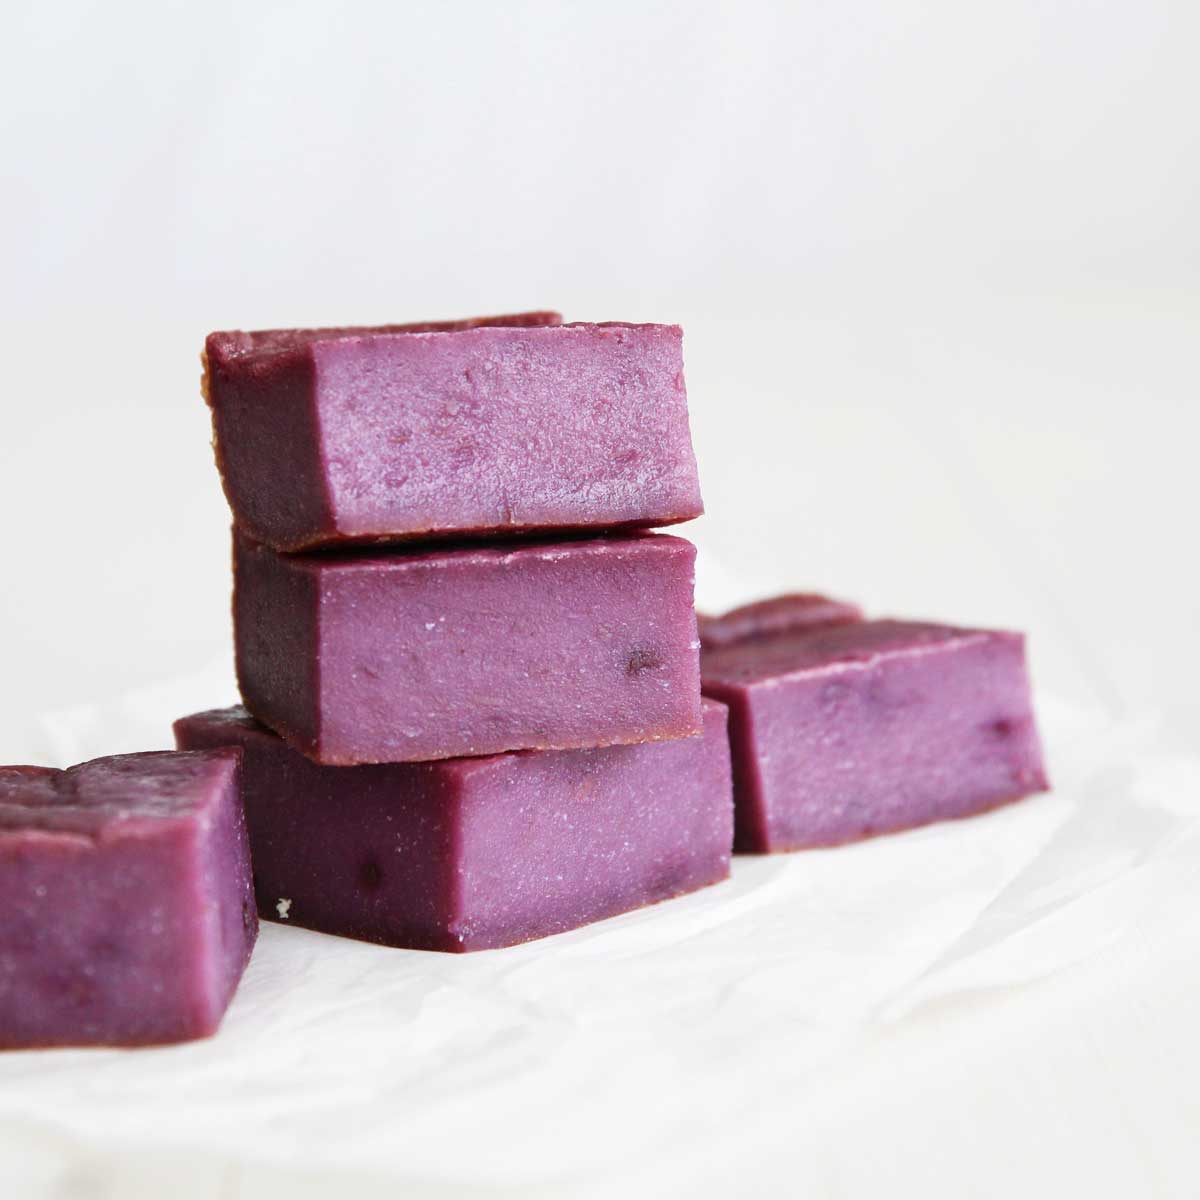 Deliciously Purple Ube Mochi Cake (Baked Nian Gao) - Peppermint Whipped Cream